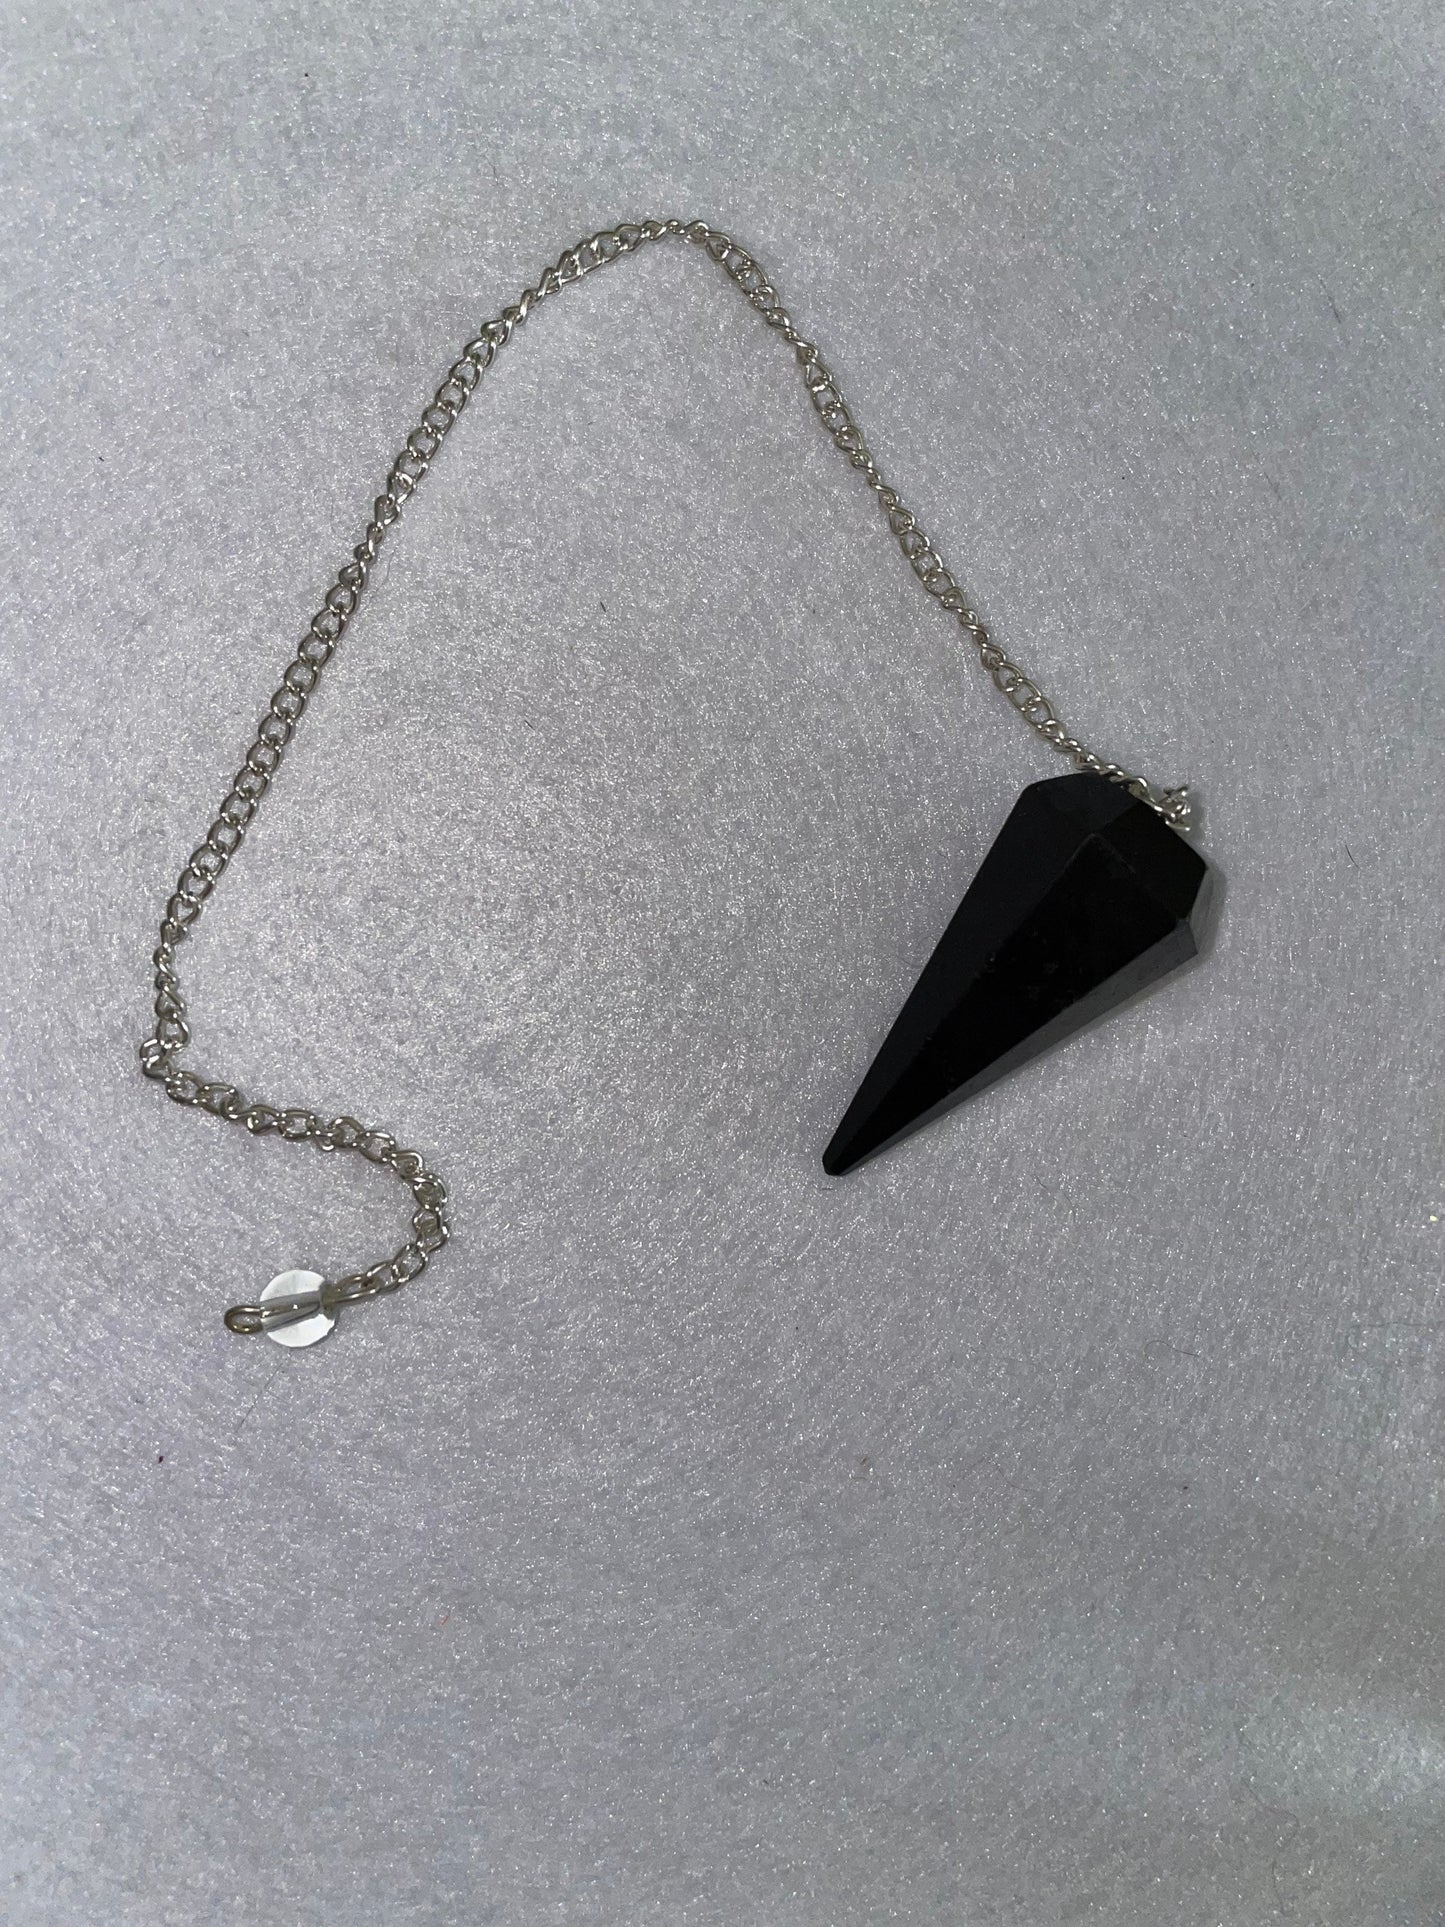 Awesome Black Obsidian Pendulum is  1.5” and with chain is 9”.25”